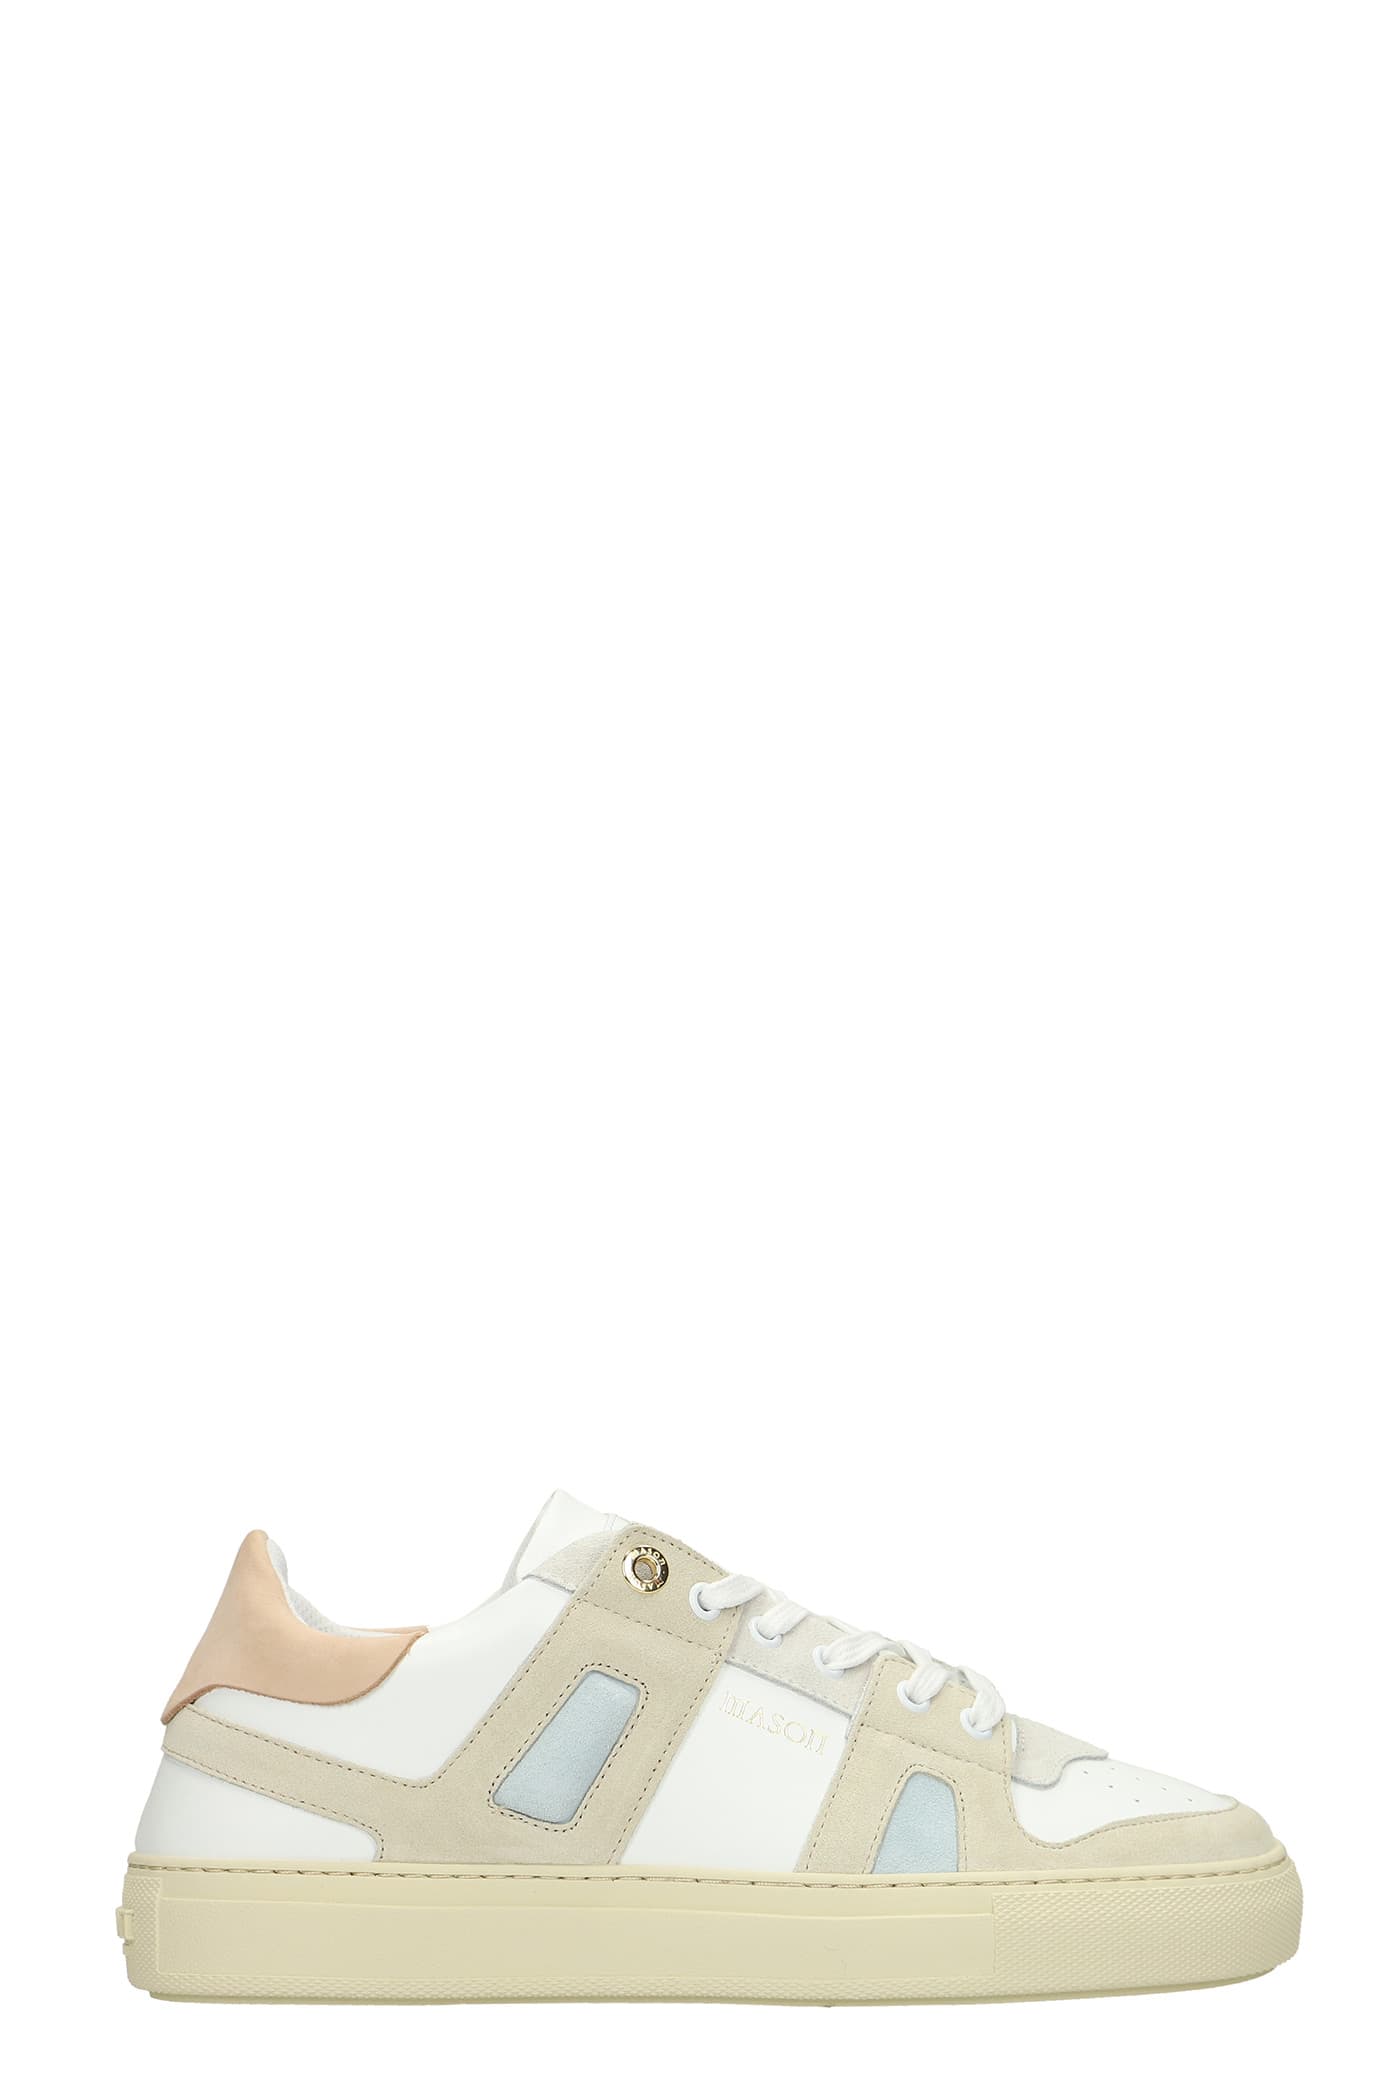 Mason Garments Bari Sneakers In White Suede And Leather